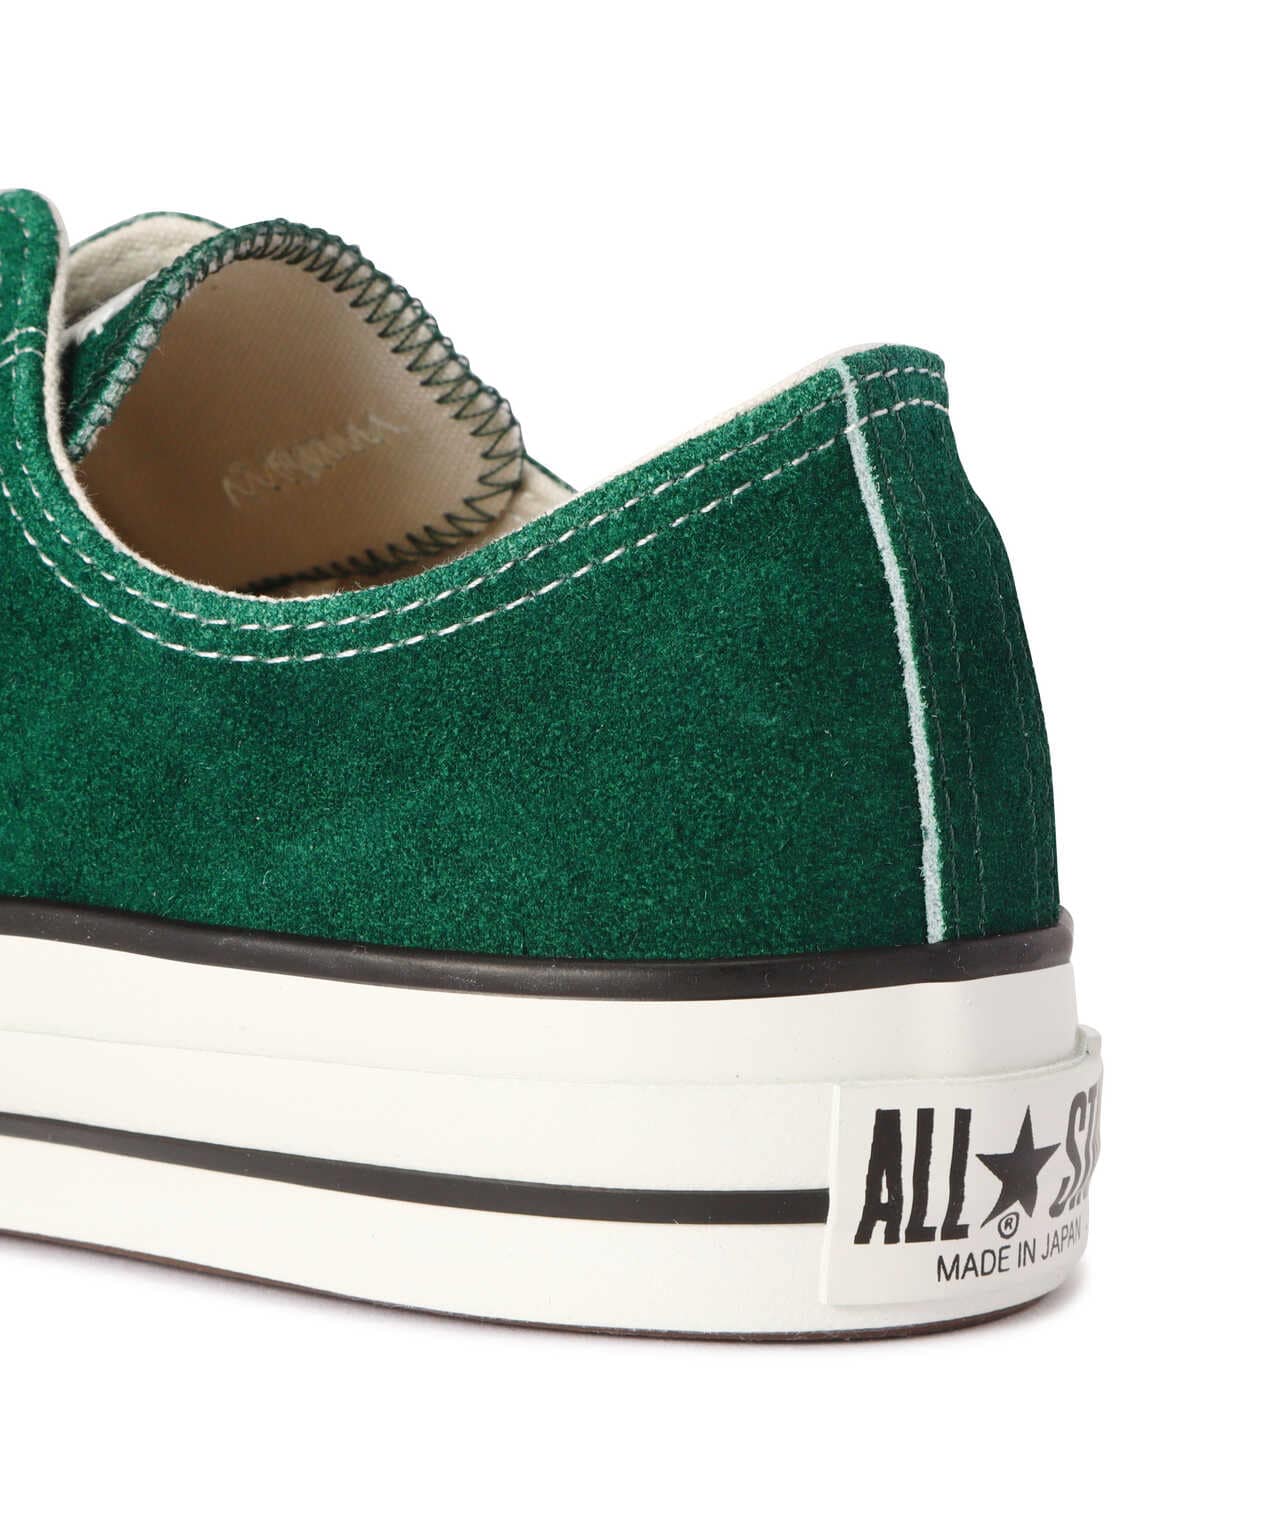 【CONVERSE】SUEDE ALL STAR J OX 日本製